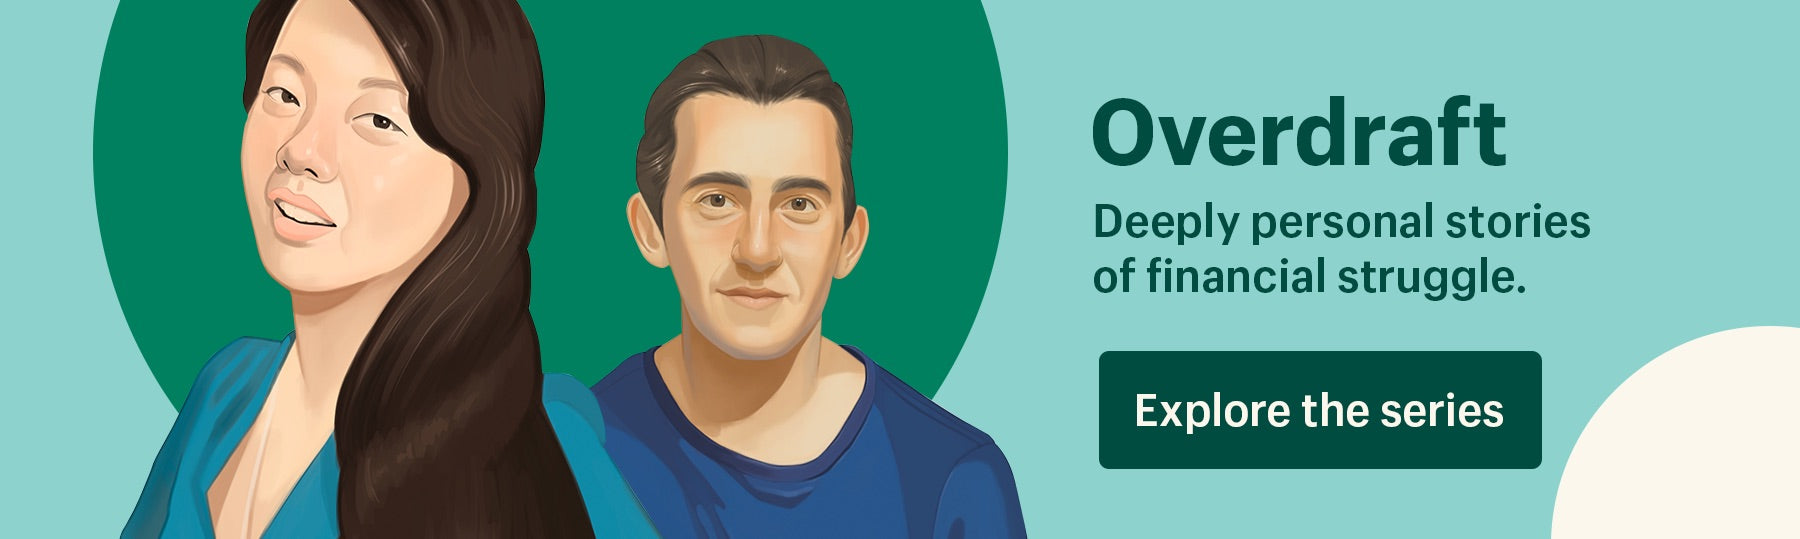 An advertisement to read Overdraft: a series of stories about deeply personal stories of financial struggle.